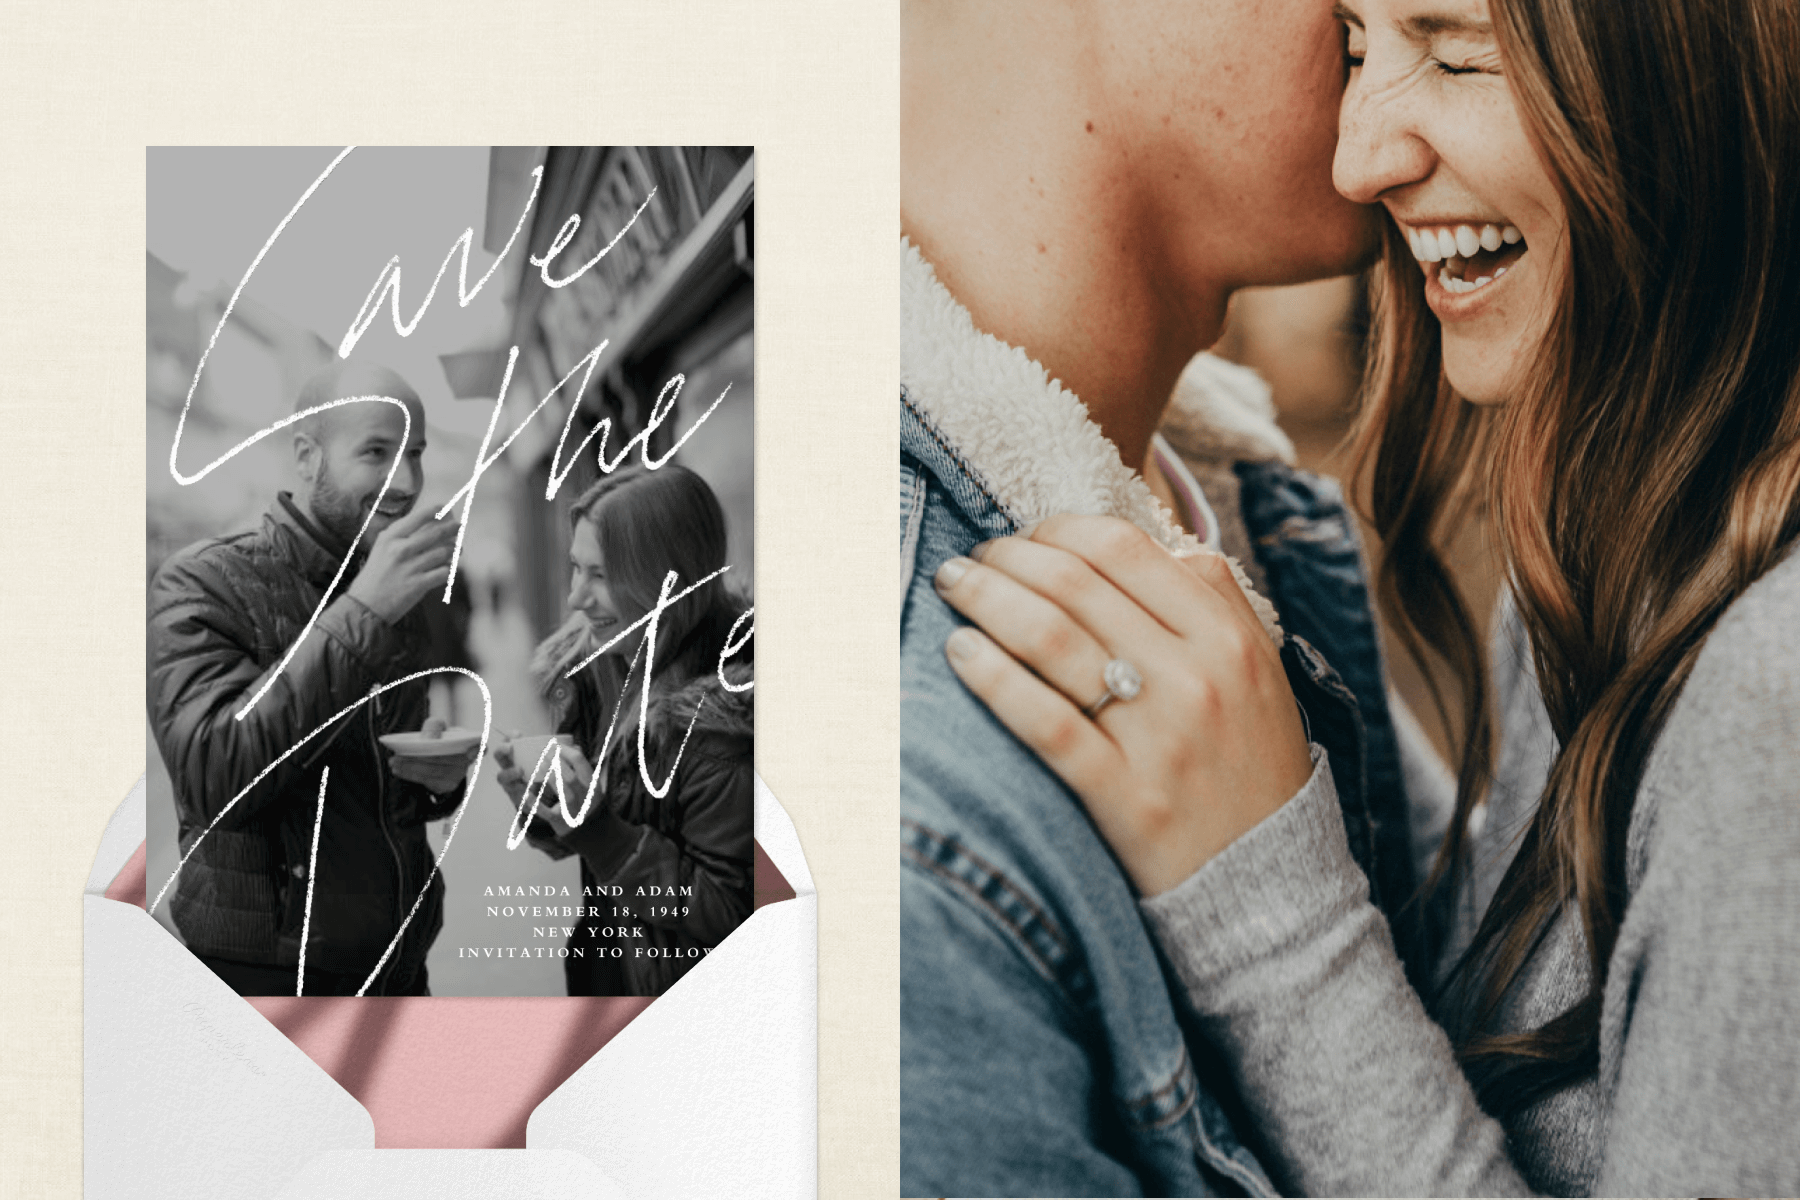 Left: A wedding save the date with a full-bleed black and white photo of a couple eating takeout food and the words “SAVE THE DATE” in script over the image. Right: A closely cropped photo of a smiling couple embracing, the woman wears an engagement ring.